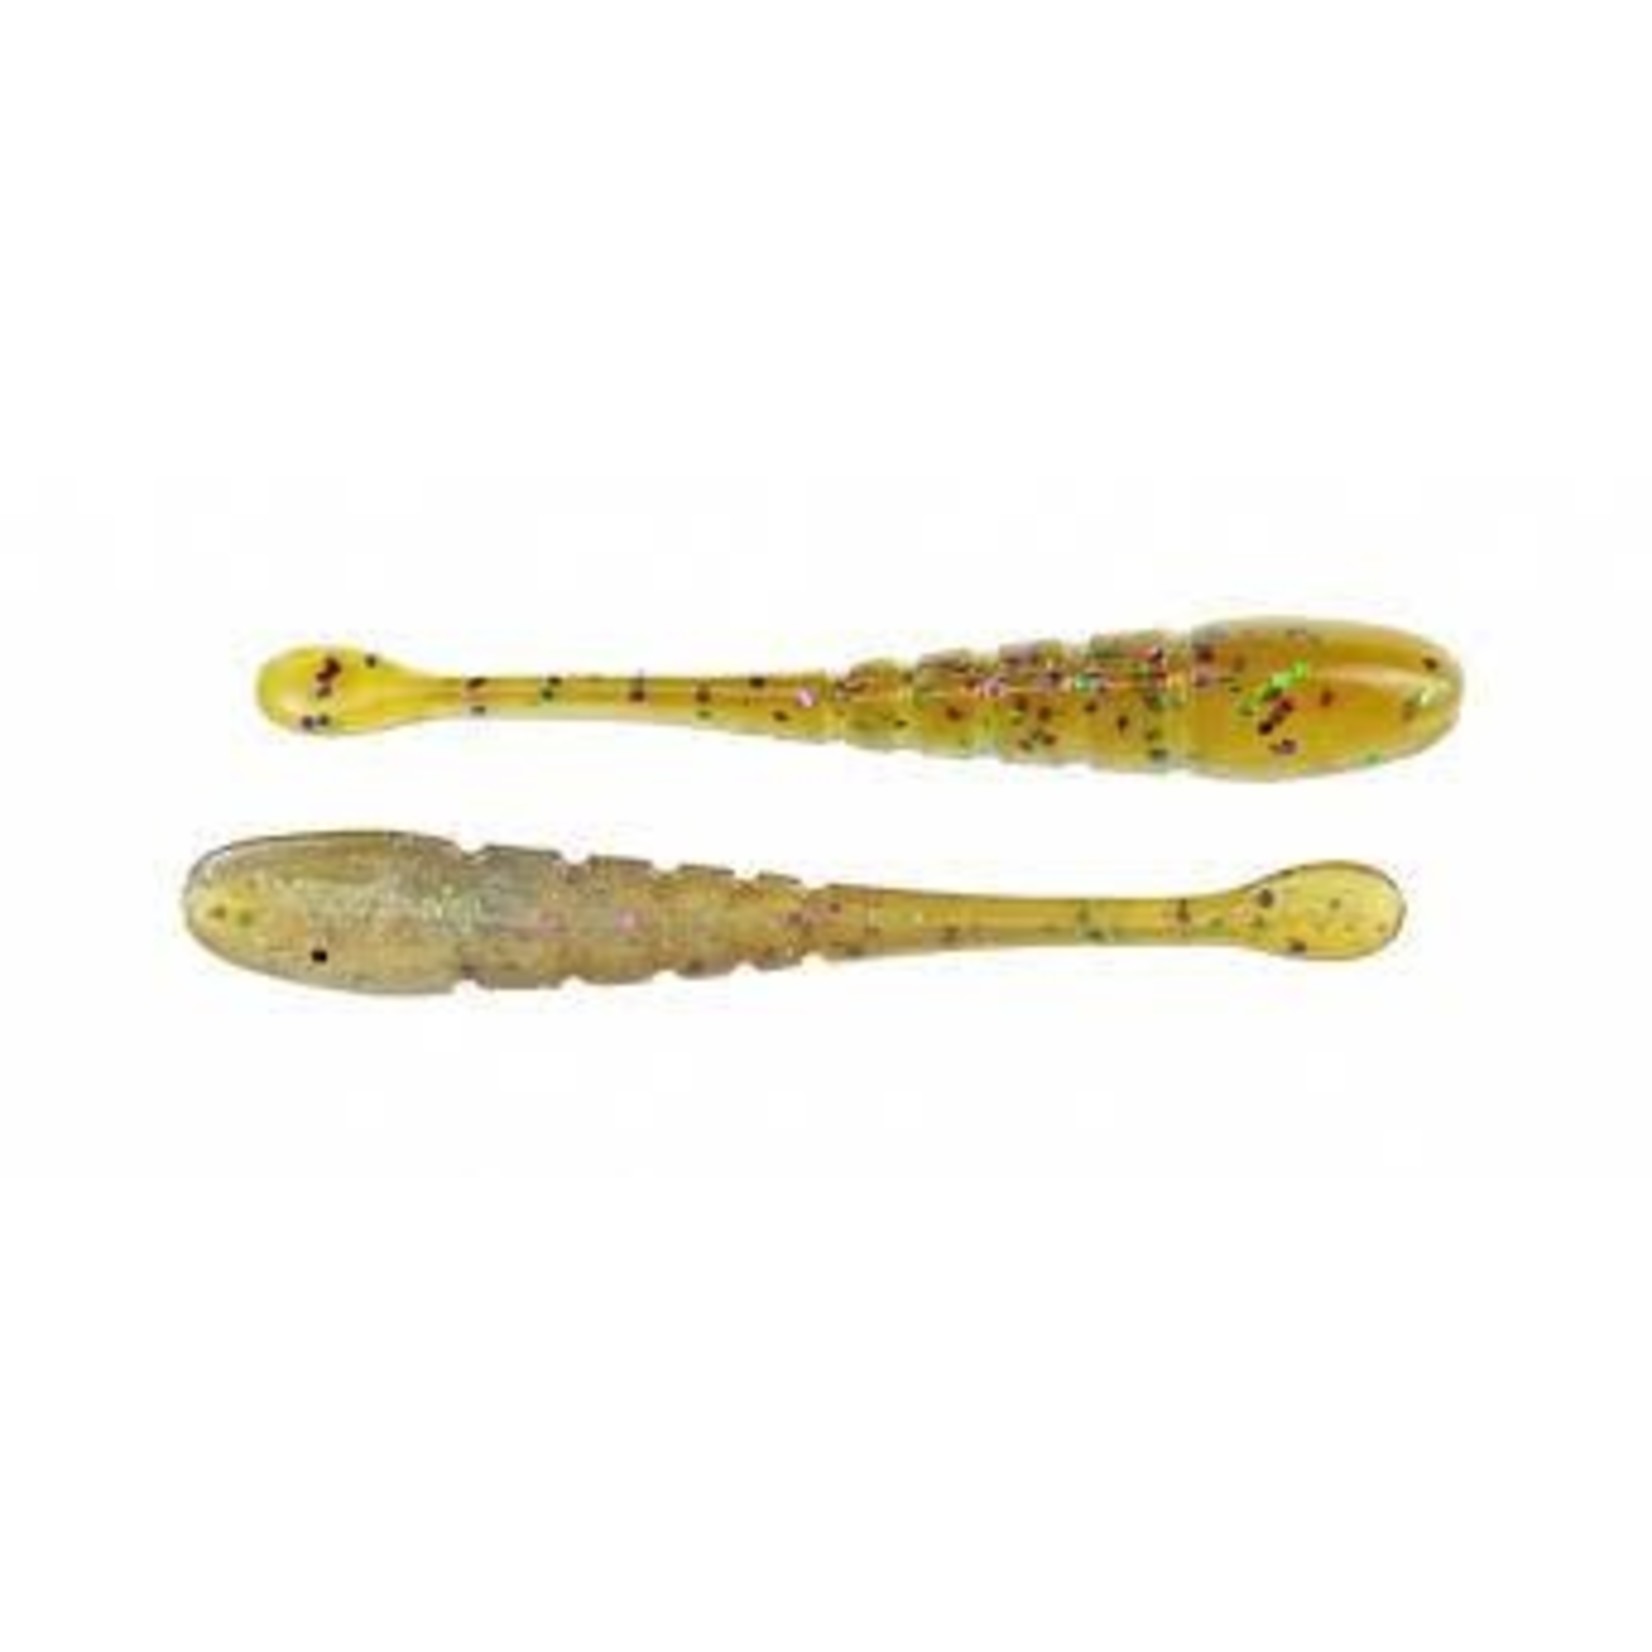 X-Zone X-Zone Lures 3.25" Pro Series Finesse Slammer